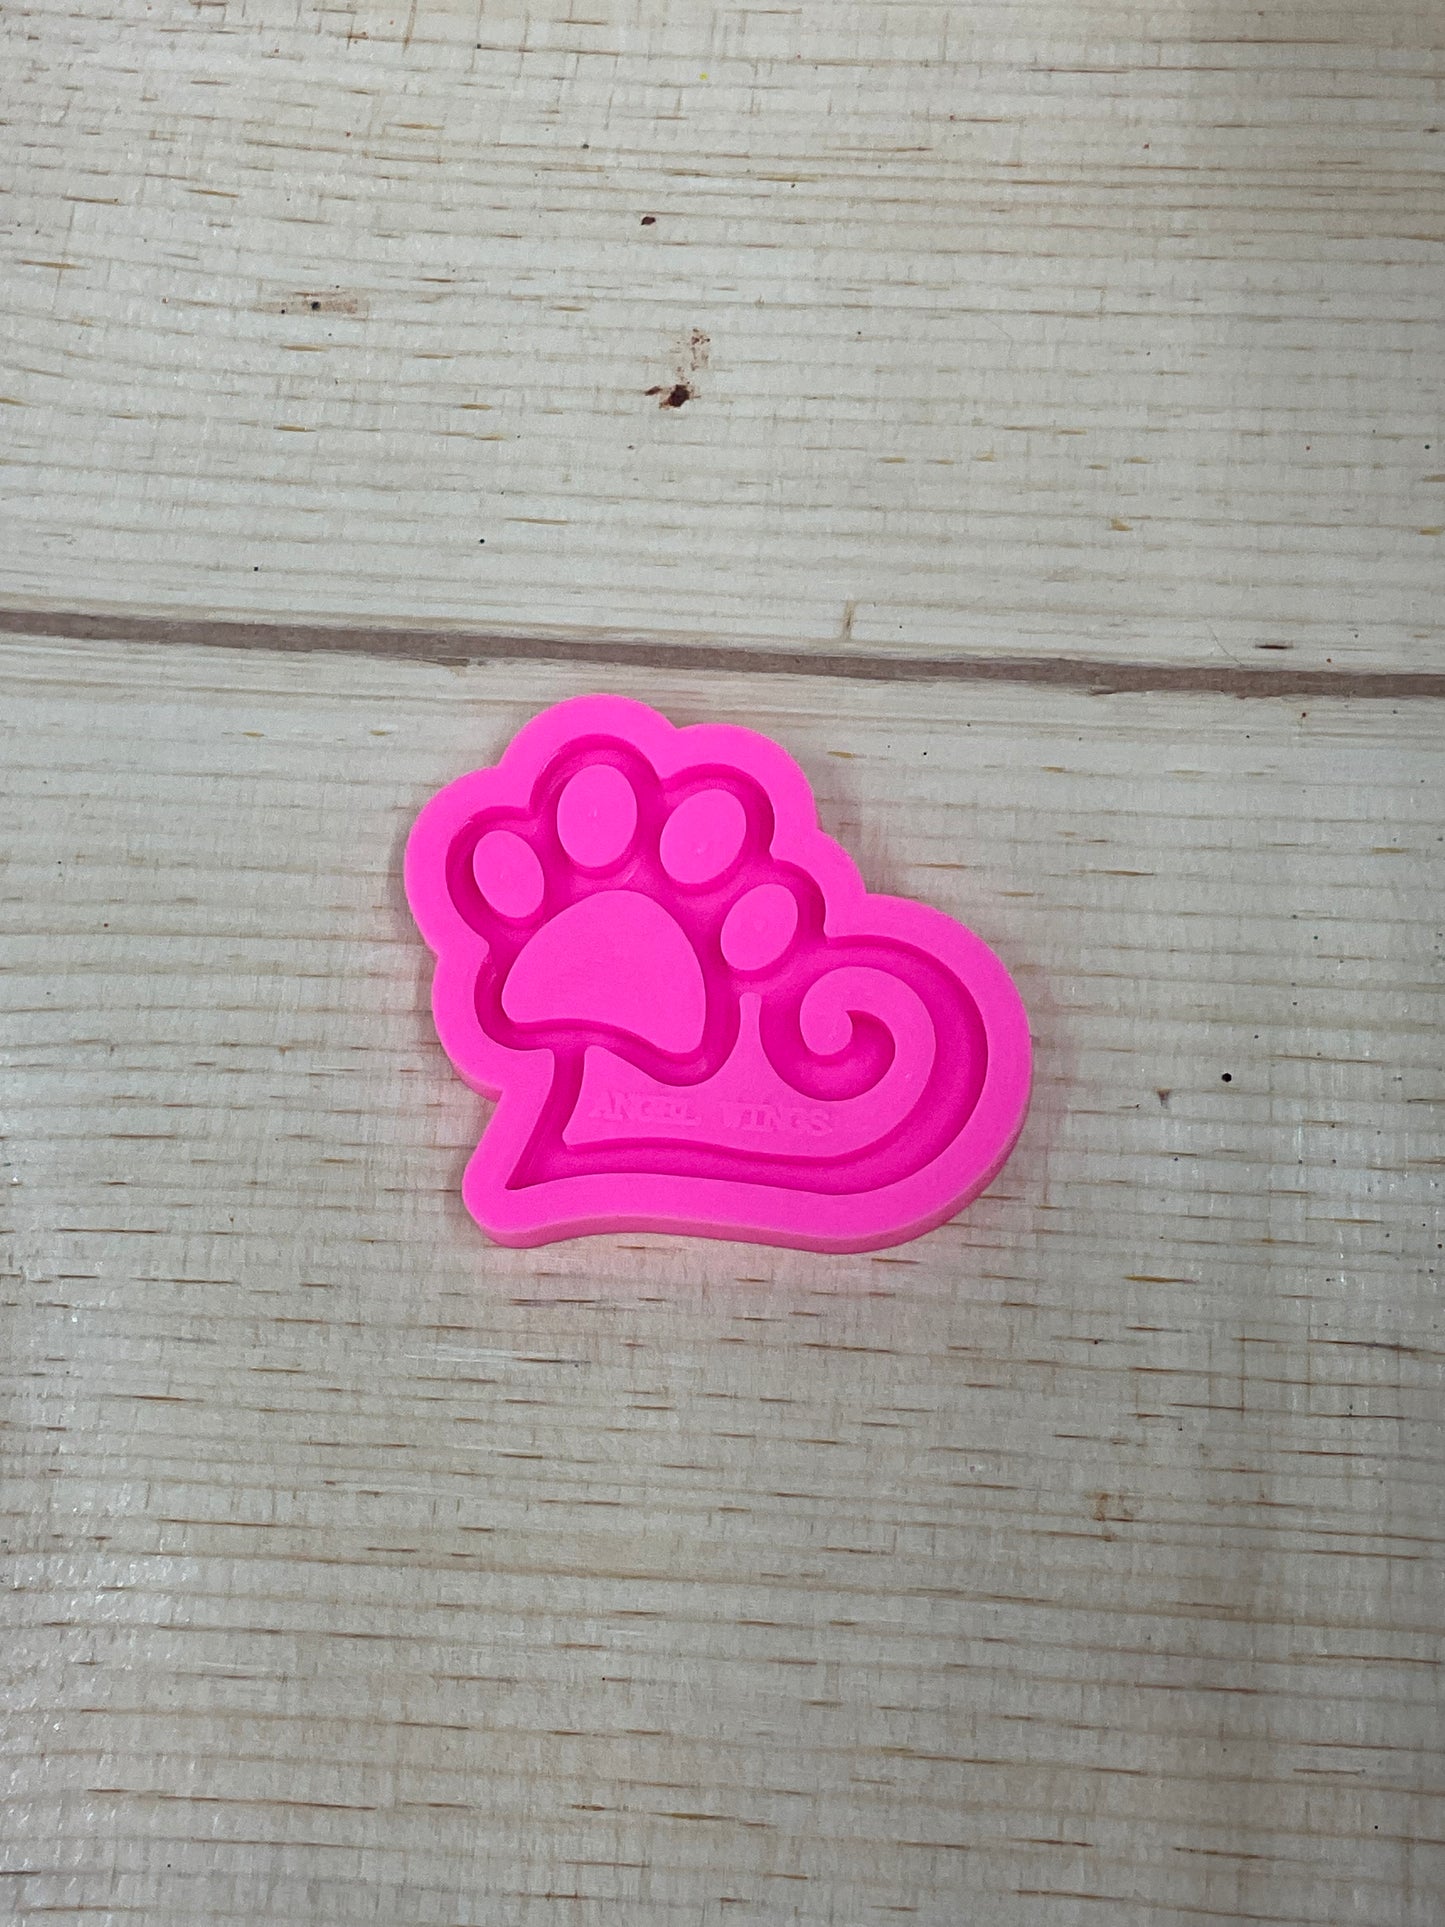 Small Paw Print Heart Keychain Mold